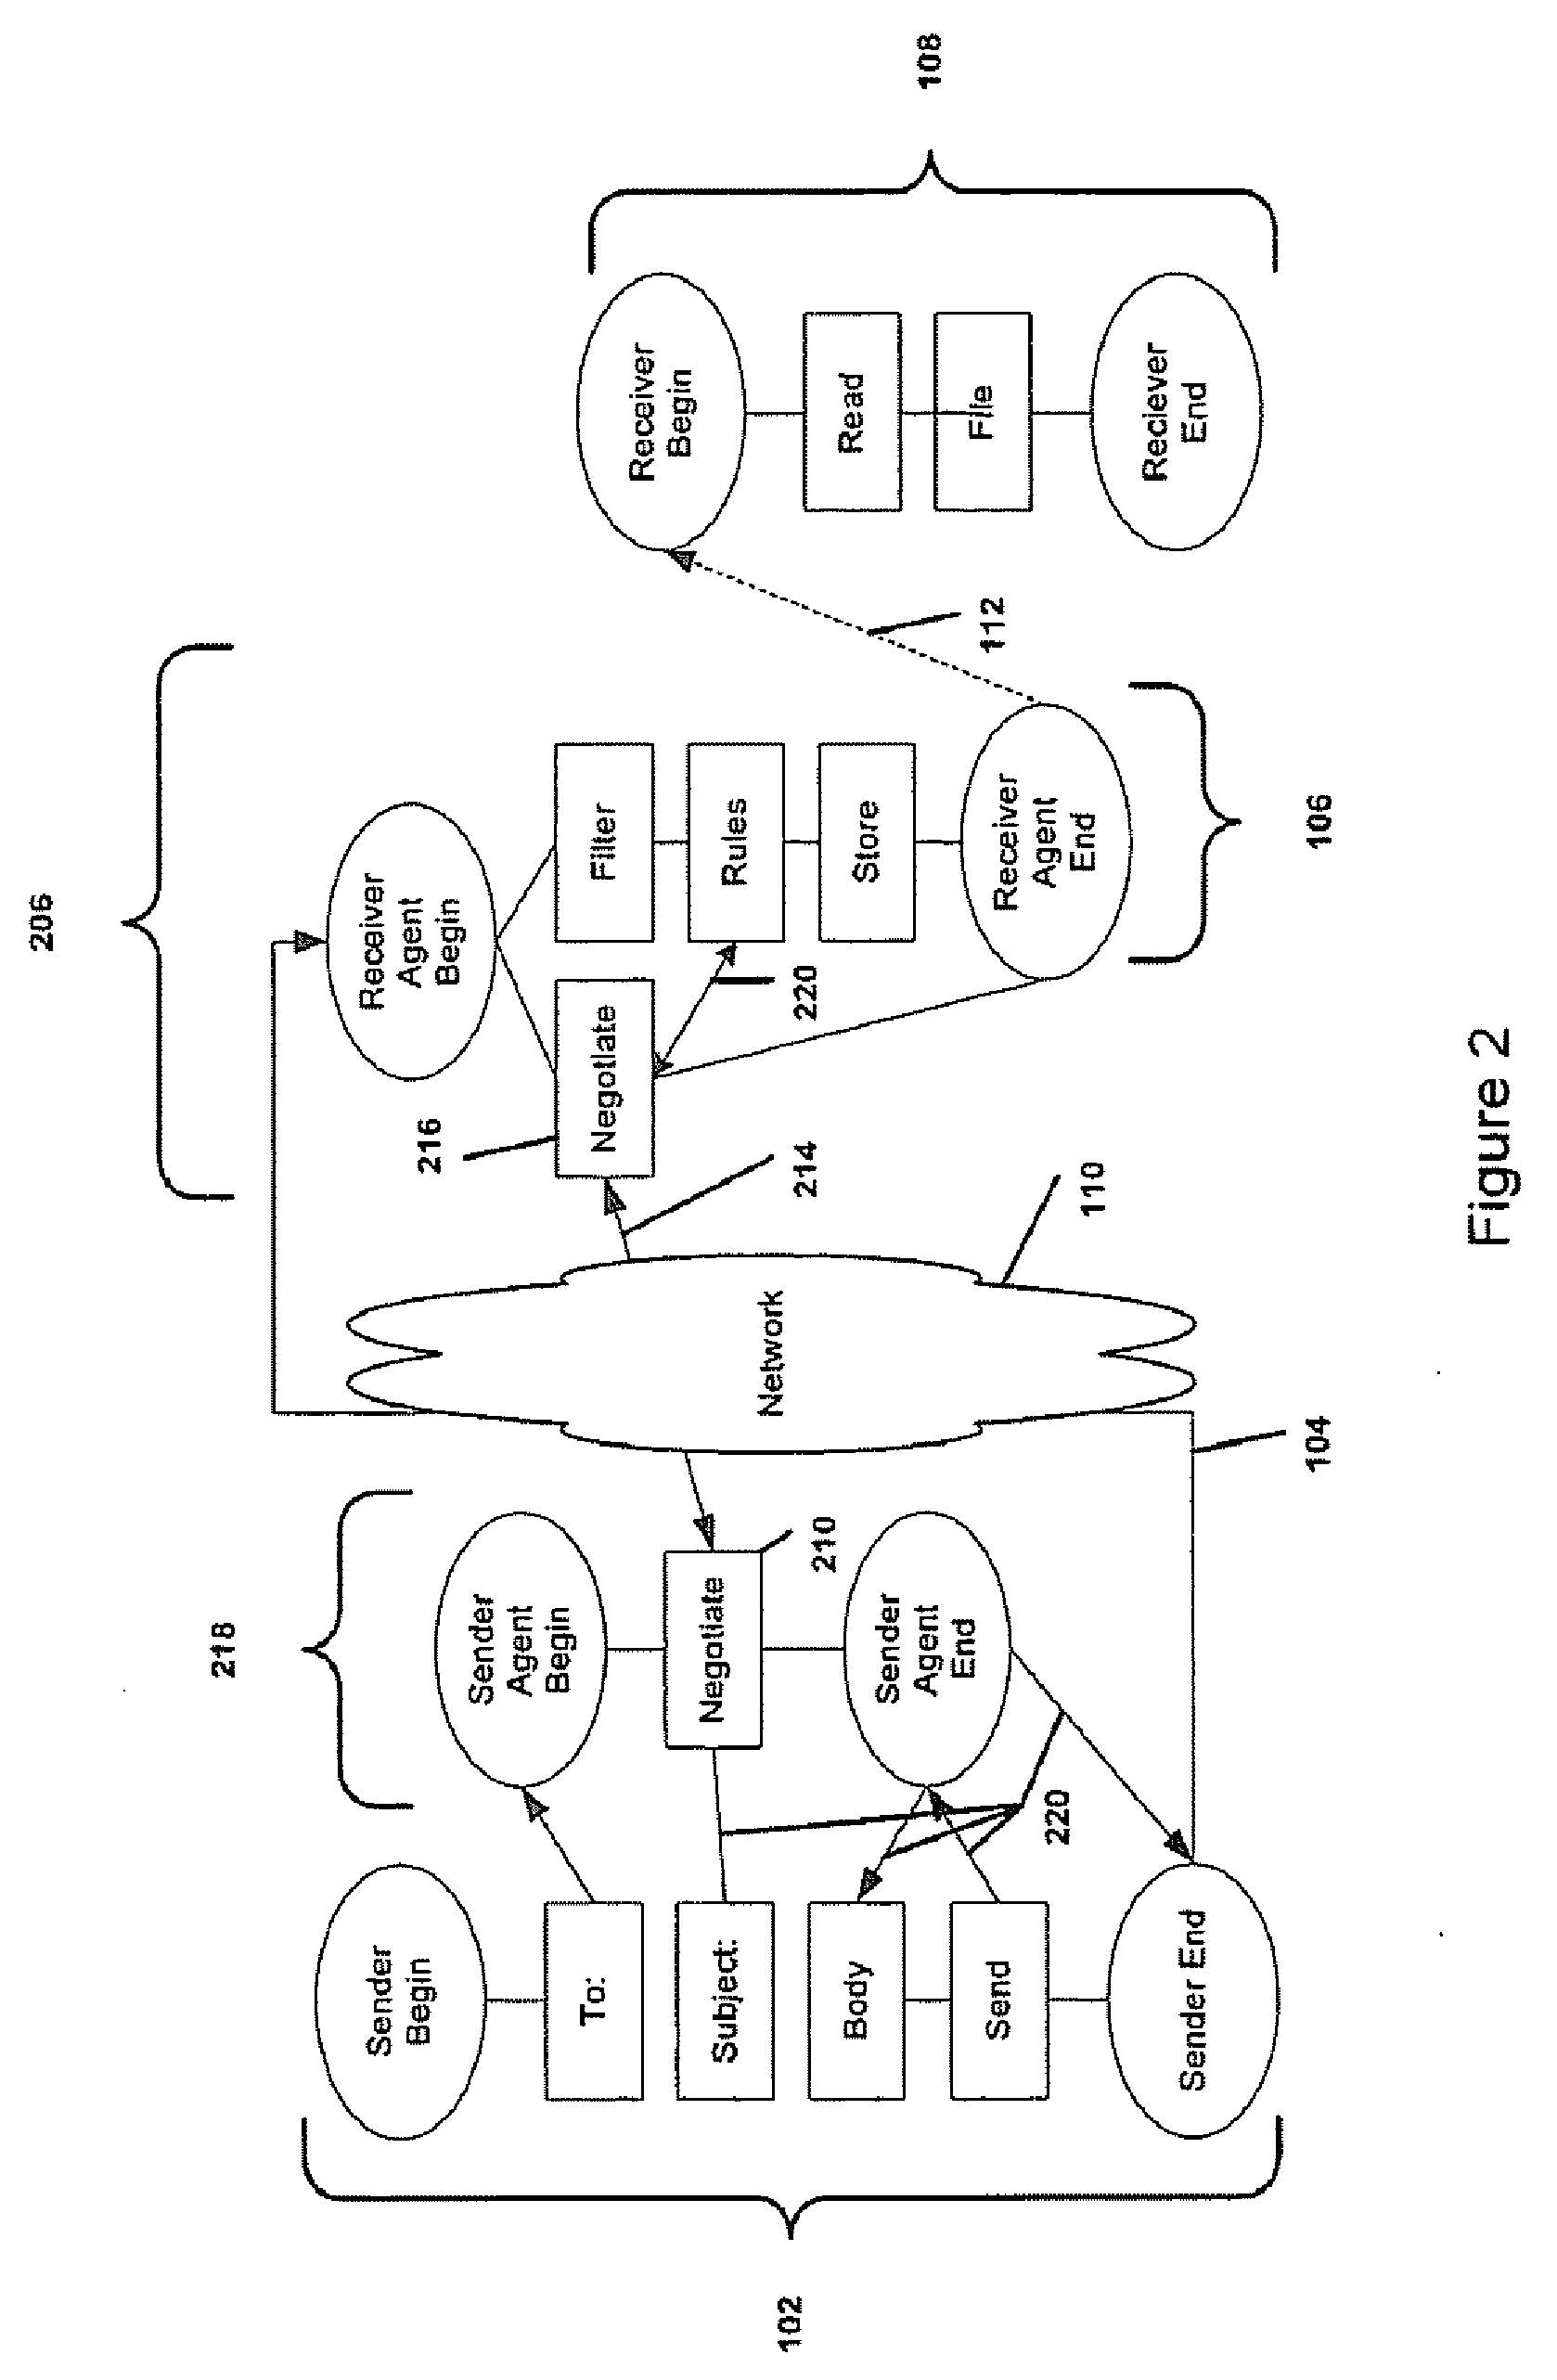 Structured Communication System and Method